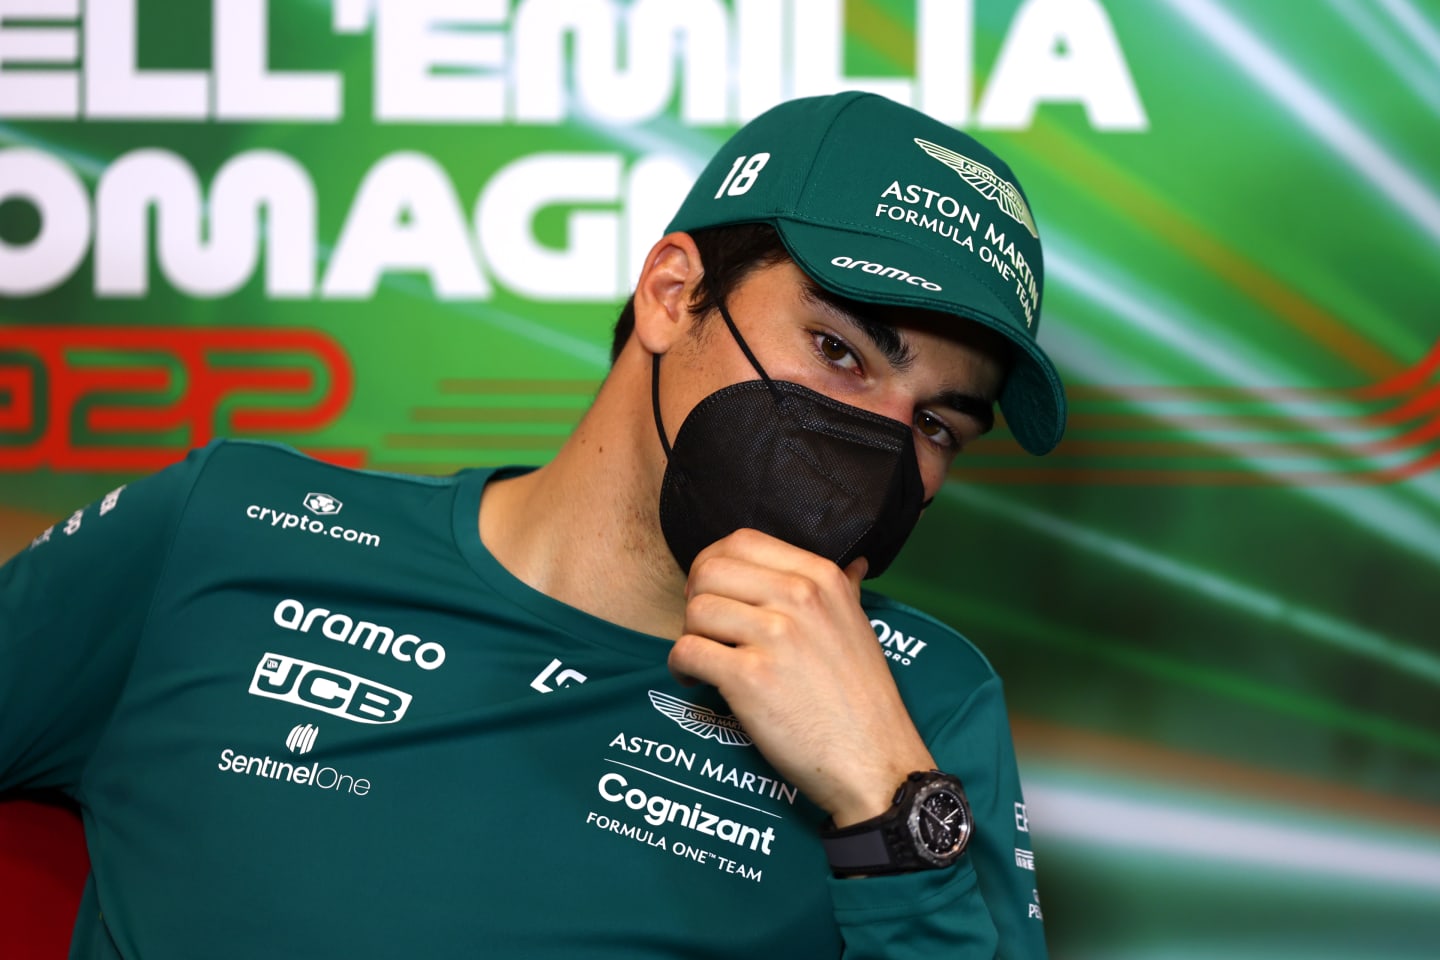 IMOLA, ITALY - APRIL 22: Lance Stroll of Canada and Aston Martin F1 Team looks on in the Drivers Press Conference prior to practice ahead of the F1 Grand Prix of Emilia Romagna at Autodromo Enzo e Dino Ferrari on April 22, 2022 in Imola, Italy. (Photo by Lars Baron/Getty Images)